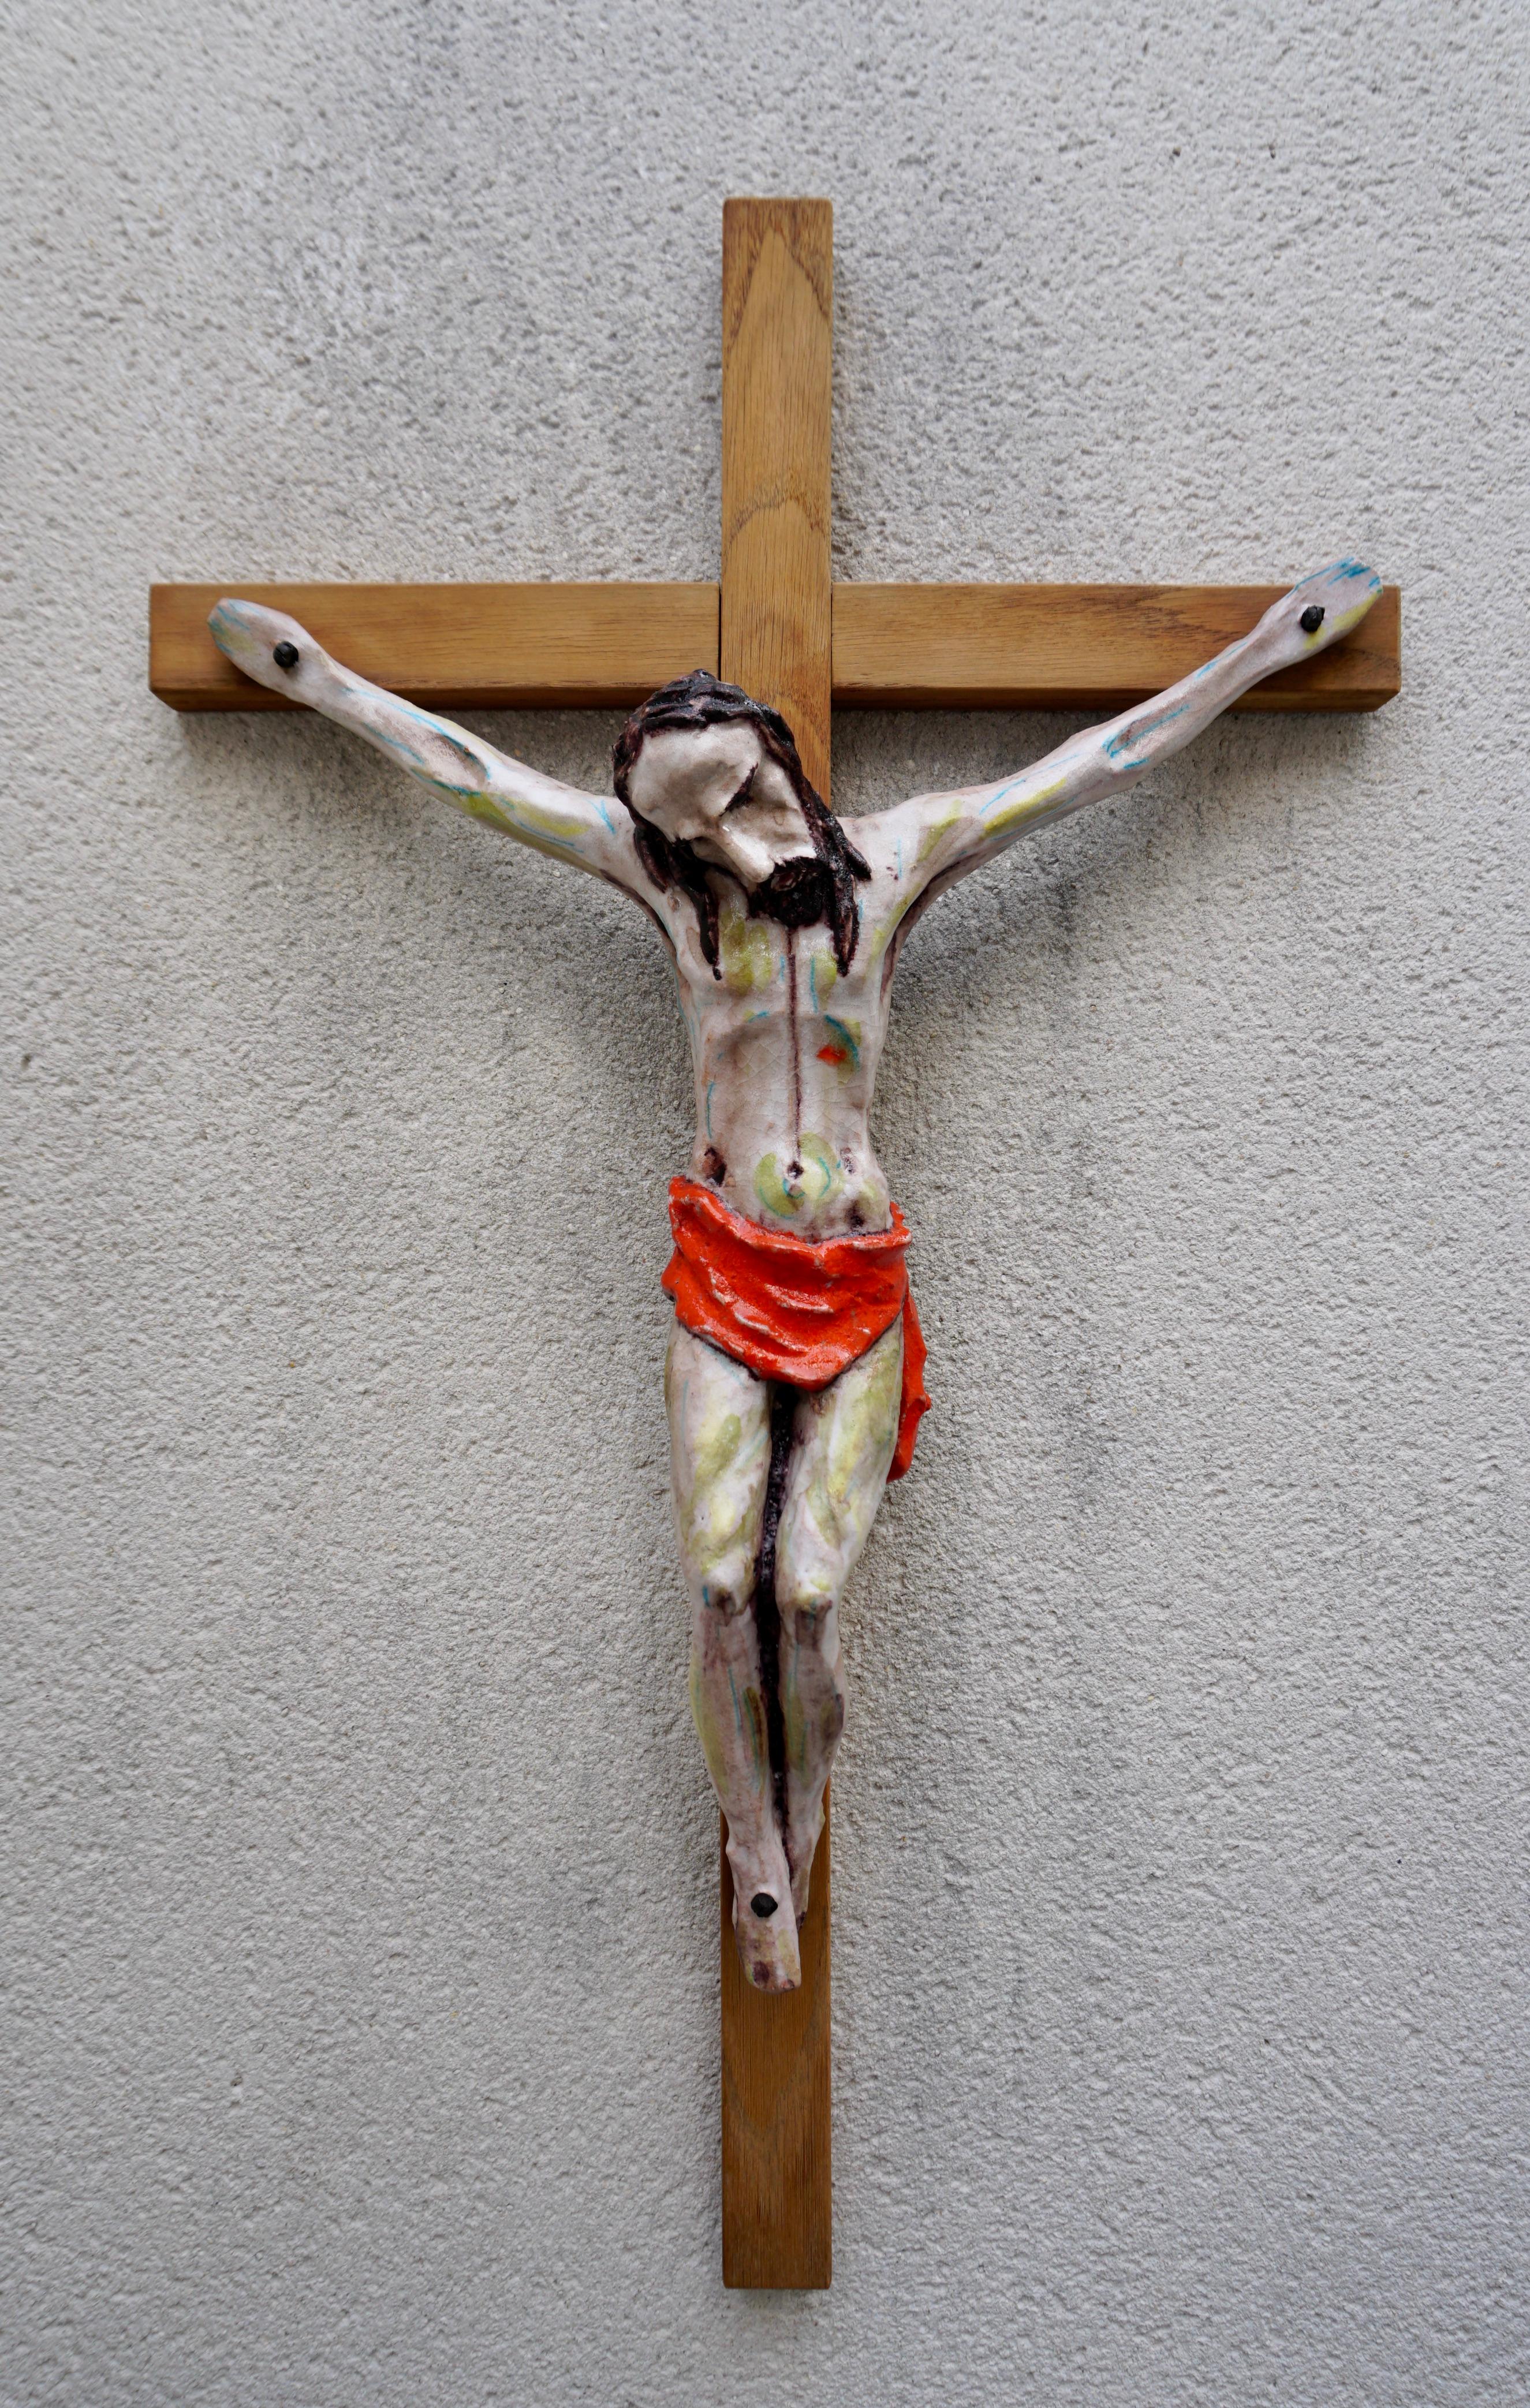 Unique and artistic crucifix from the Italian Midcentury Modern era. This ceramic work of religious art also comes with a mild glazing and the unique elongated design makes it even more modern and 'experimental'.
Signed, Italy.

